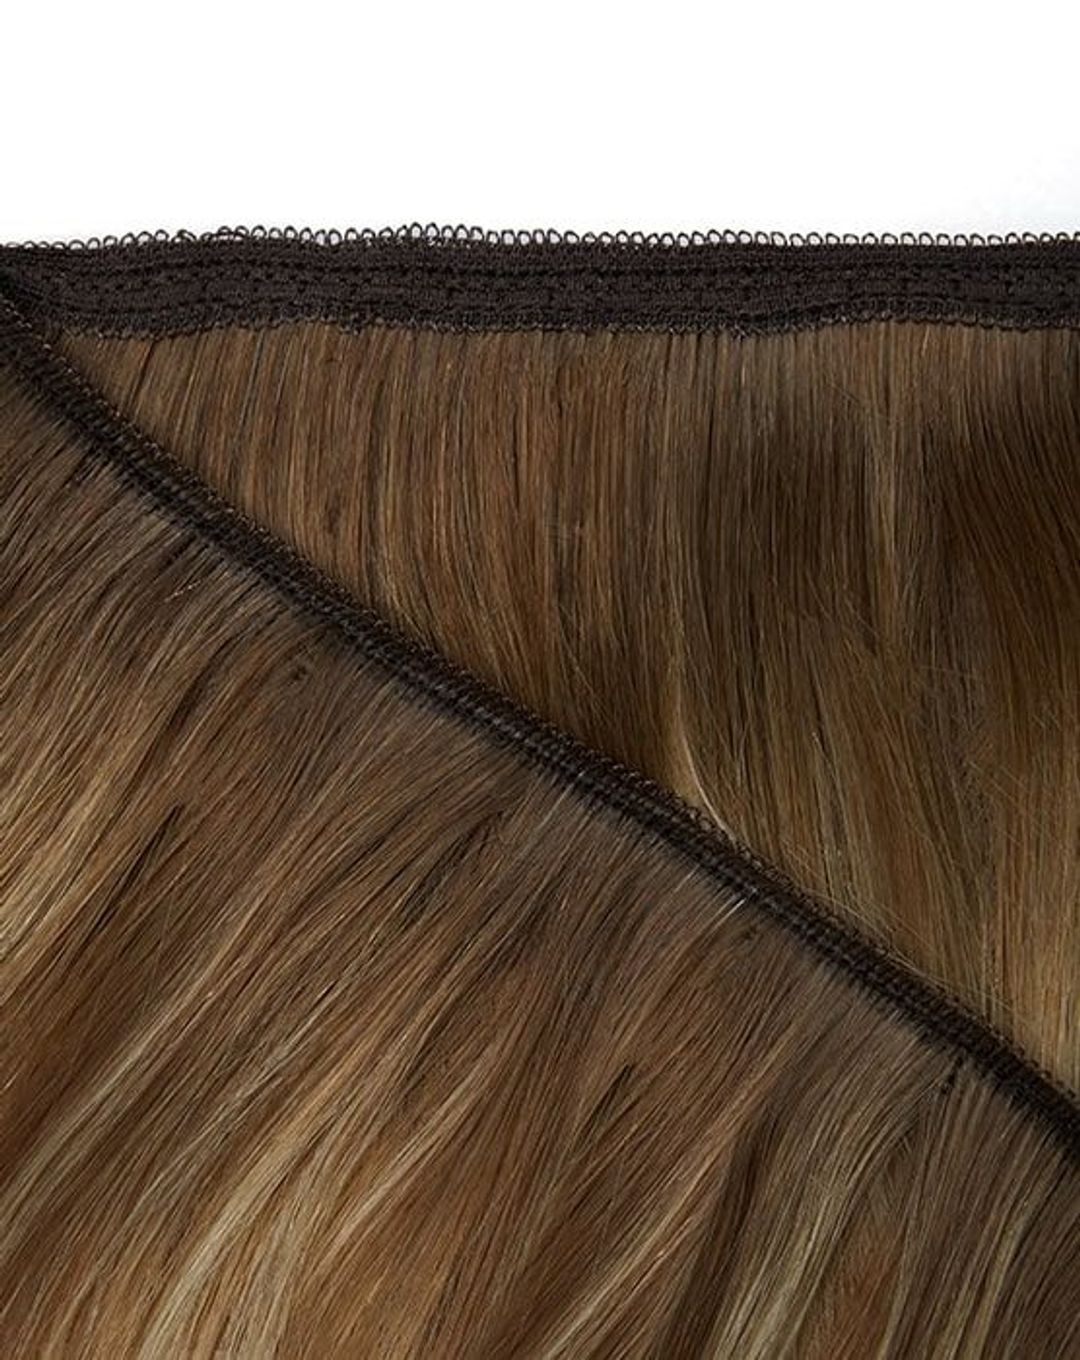 Beauty Works Gold Double Weft Hair Extensions - Mocha Melt,18"